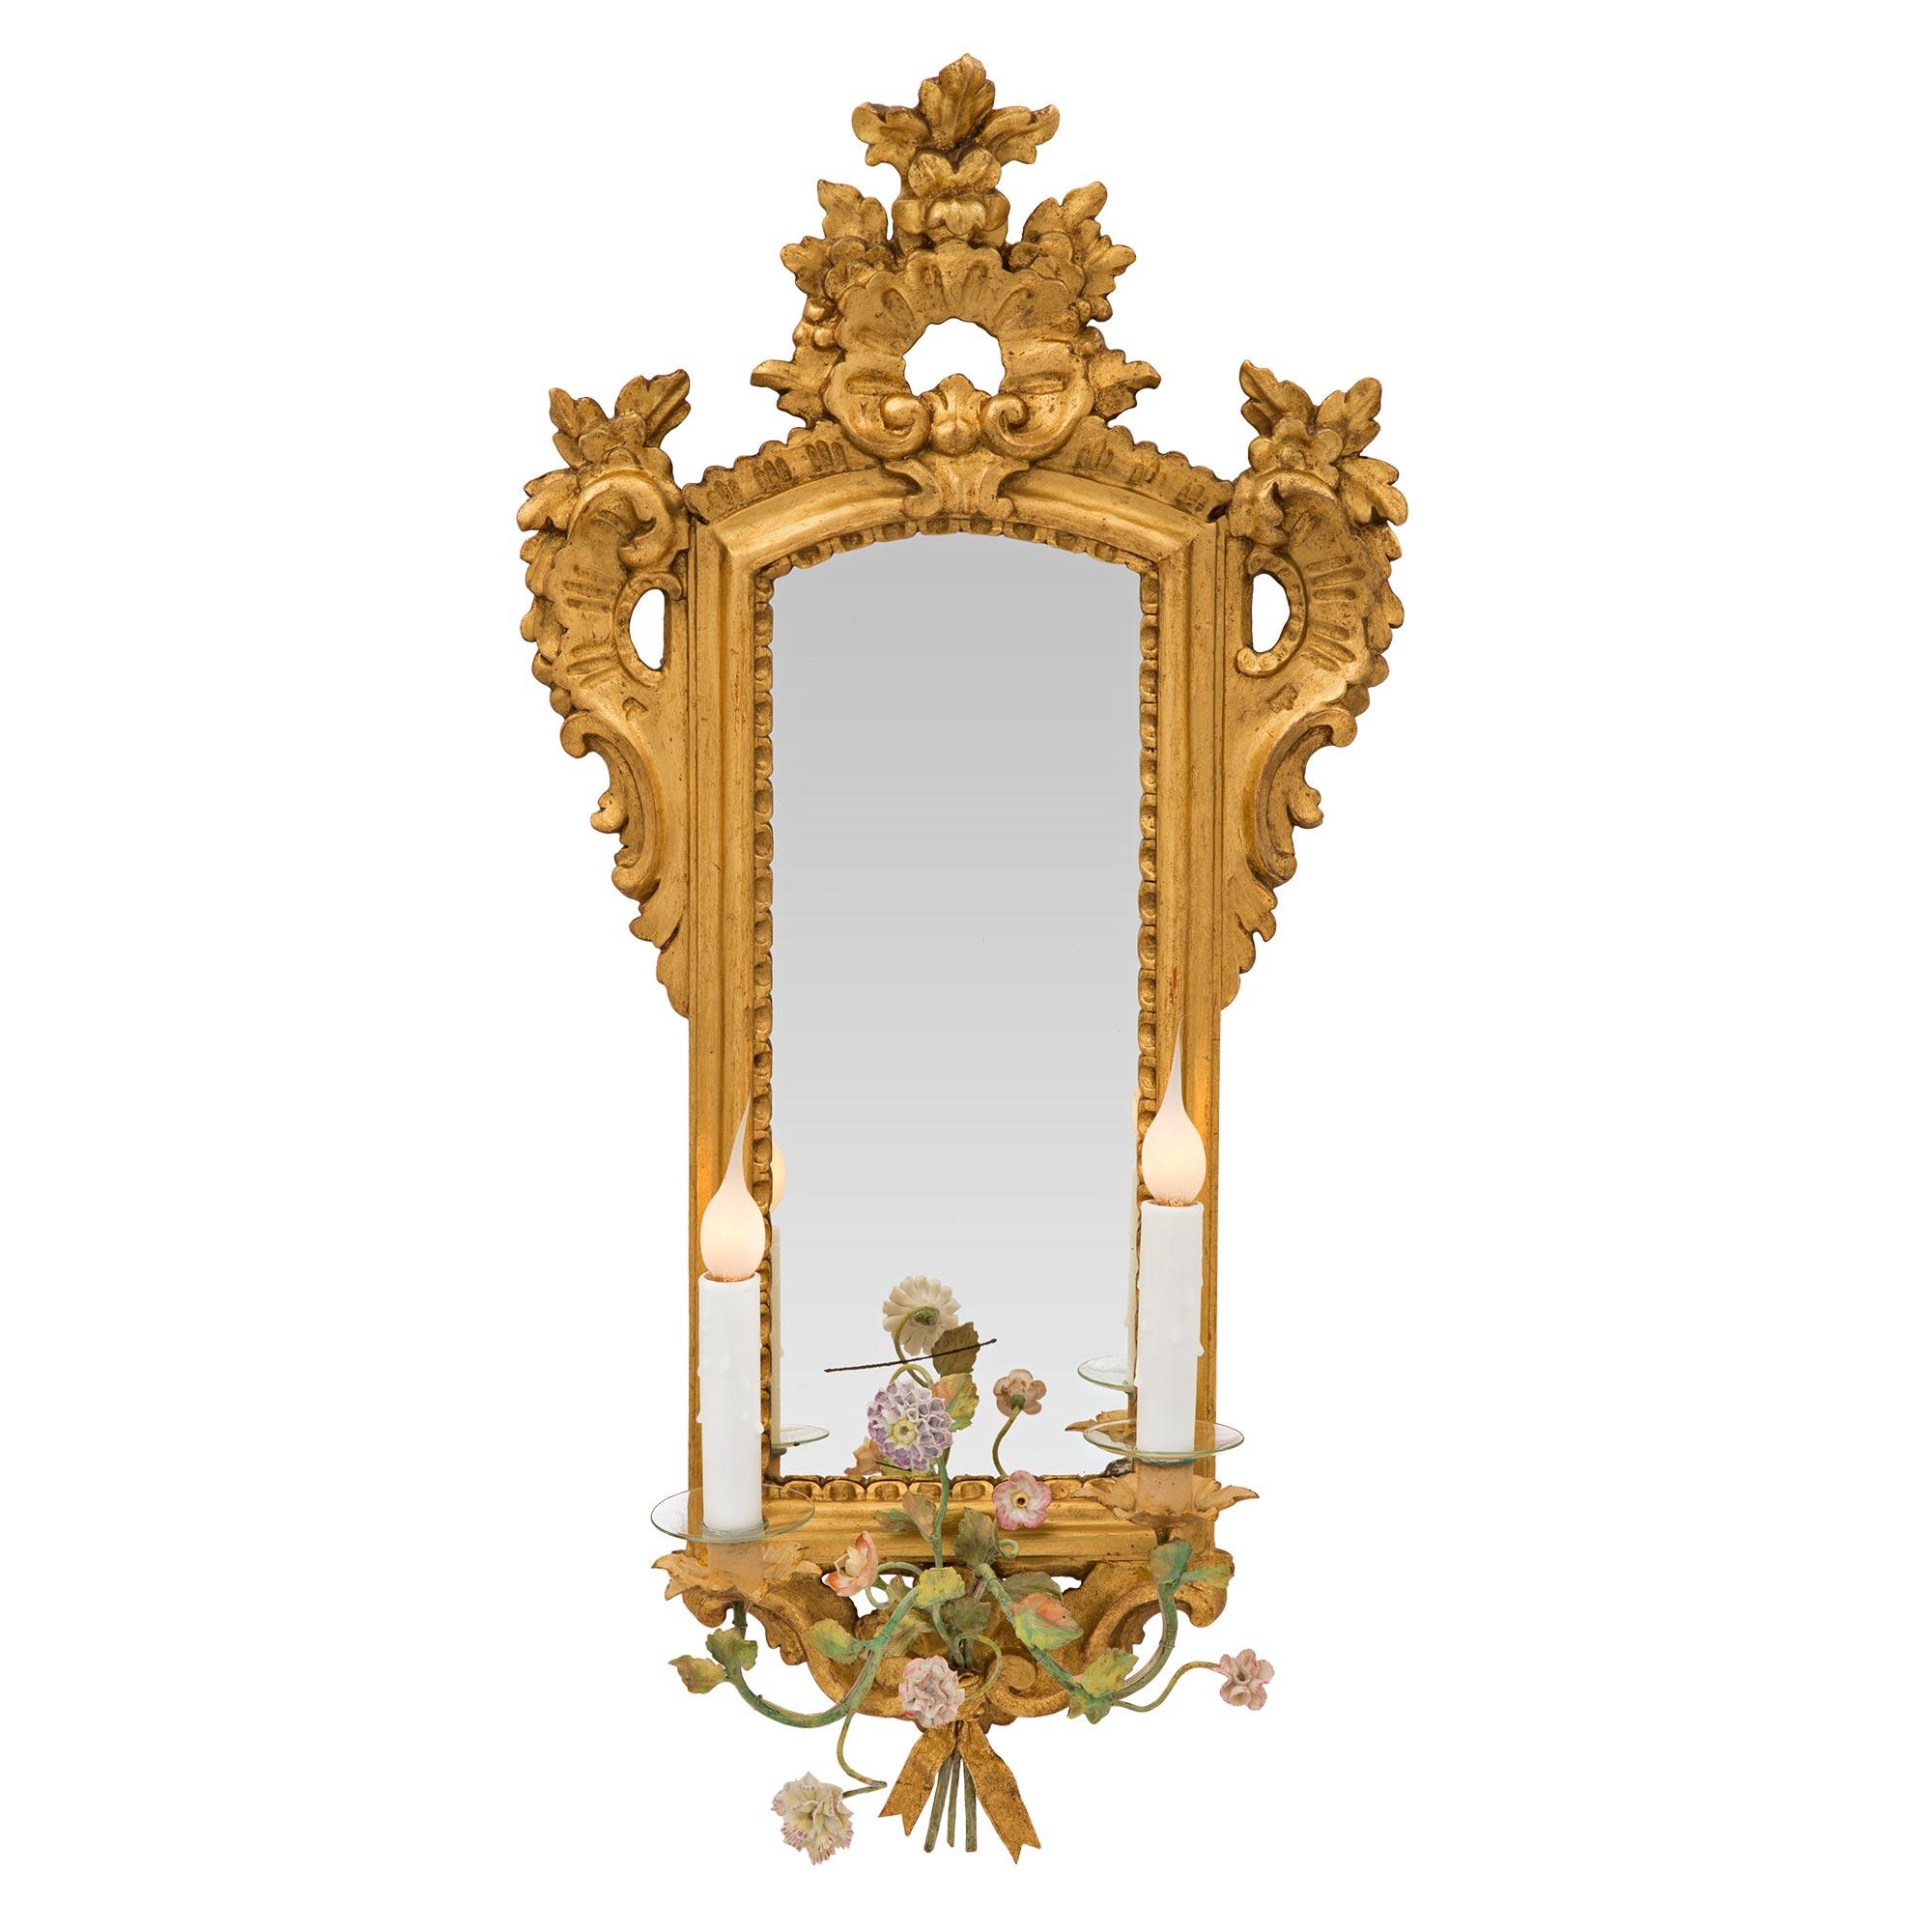 A stunning and most unique set of four Italian early 19th century Louis XV st. giltwood and Saxe porcelain mirrored sconces. Each charming sconce retains its original mirror plate set within an elegant and most decorative mottled frame with a lovely